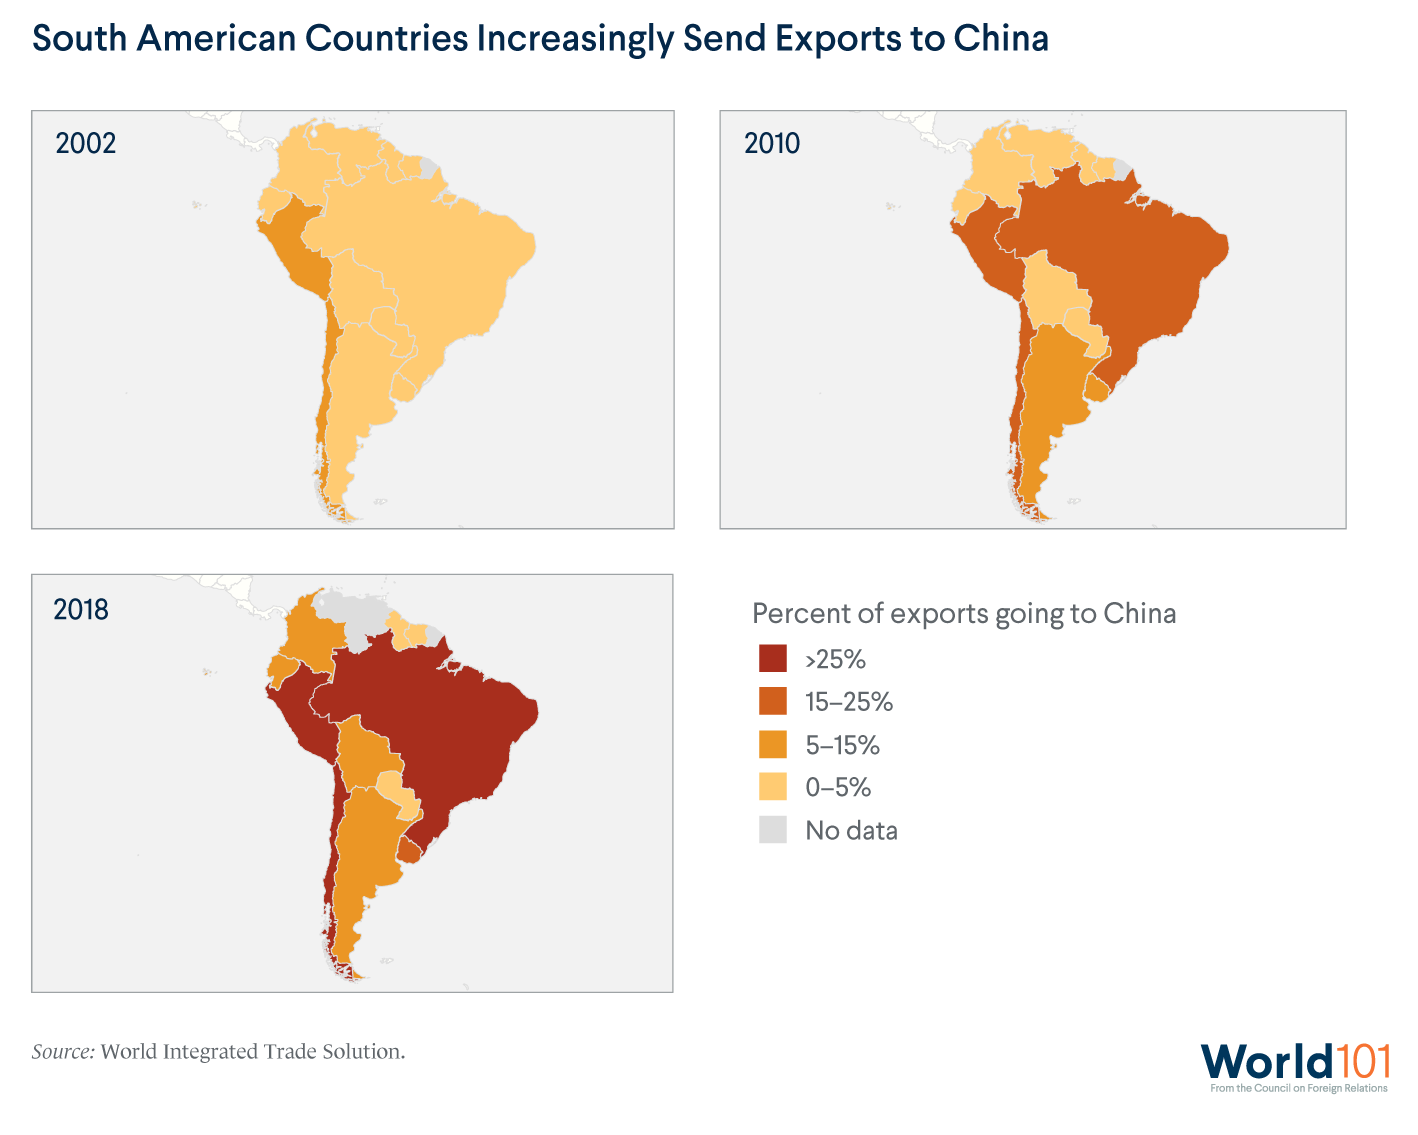 Maps showing each country in South America's percent of exports going to China generally increasing from 2002 to 2010 to 2018, according to World Integrated Trade Solution. For more info contact us at world101@cfr.org.